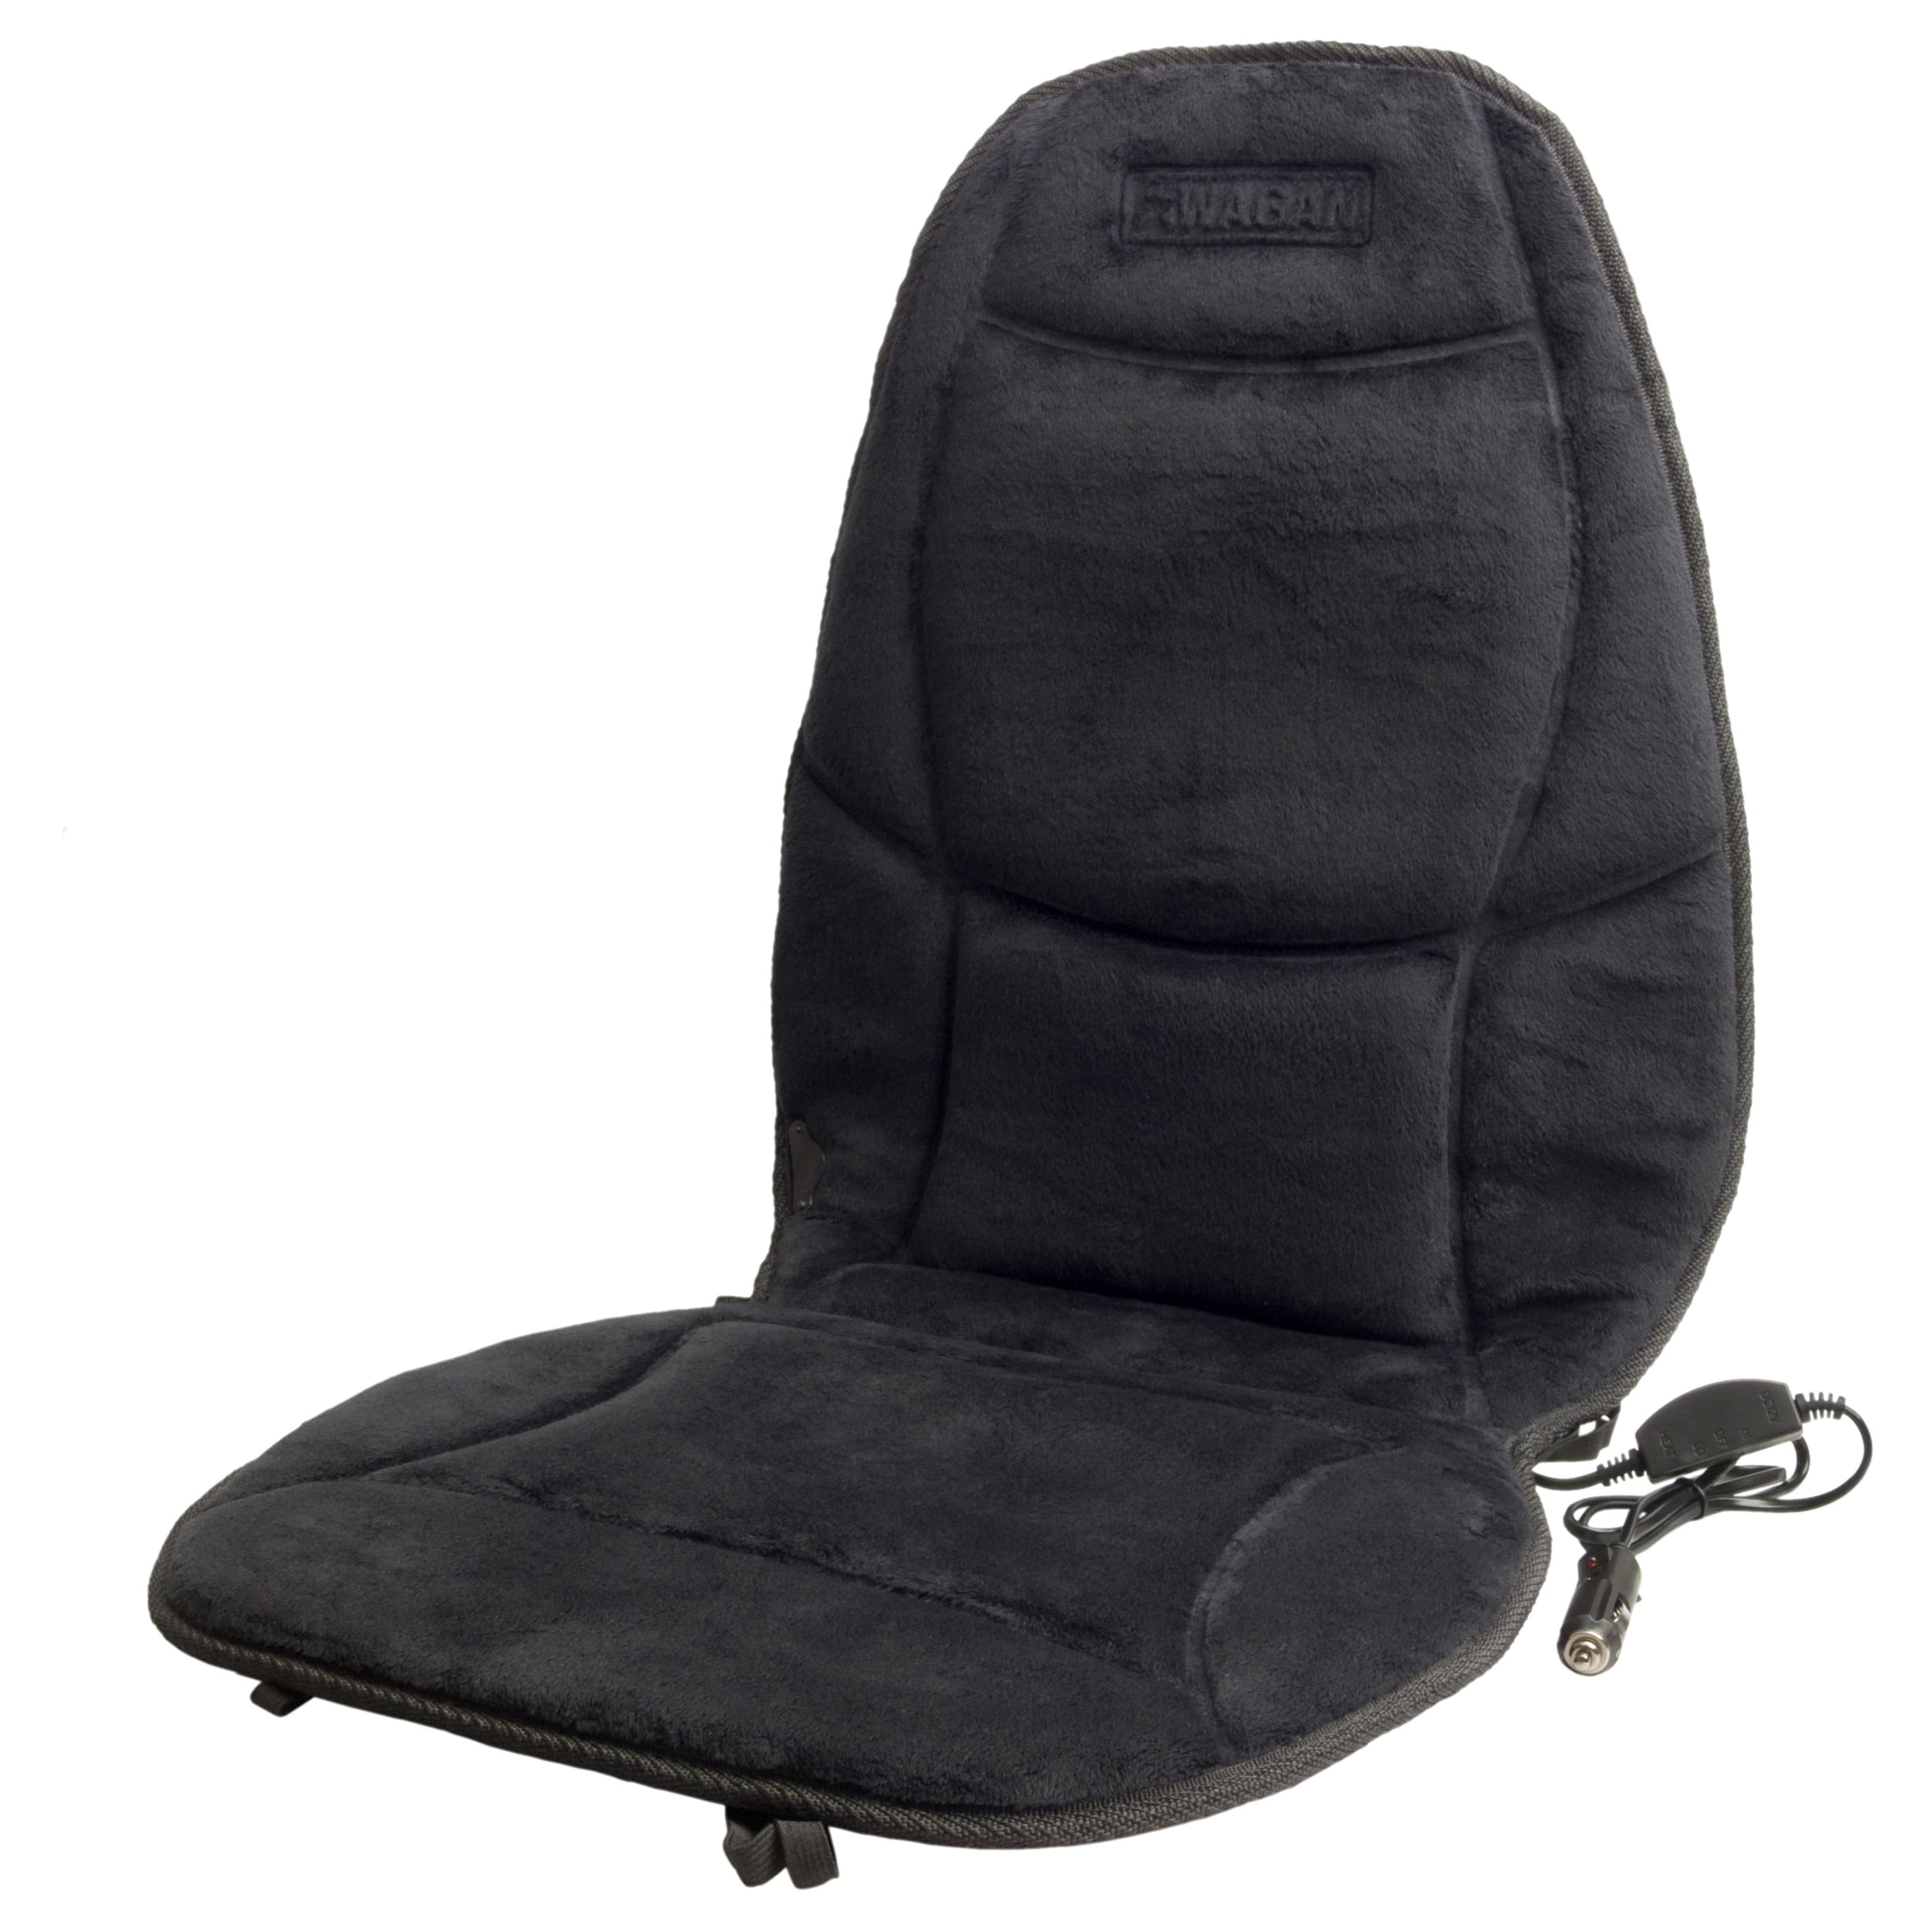 Deluxe Swivel Seat Cushion– ComfortFinds